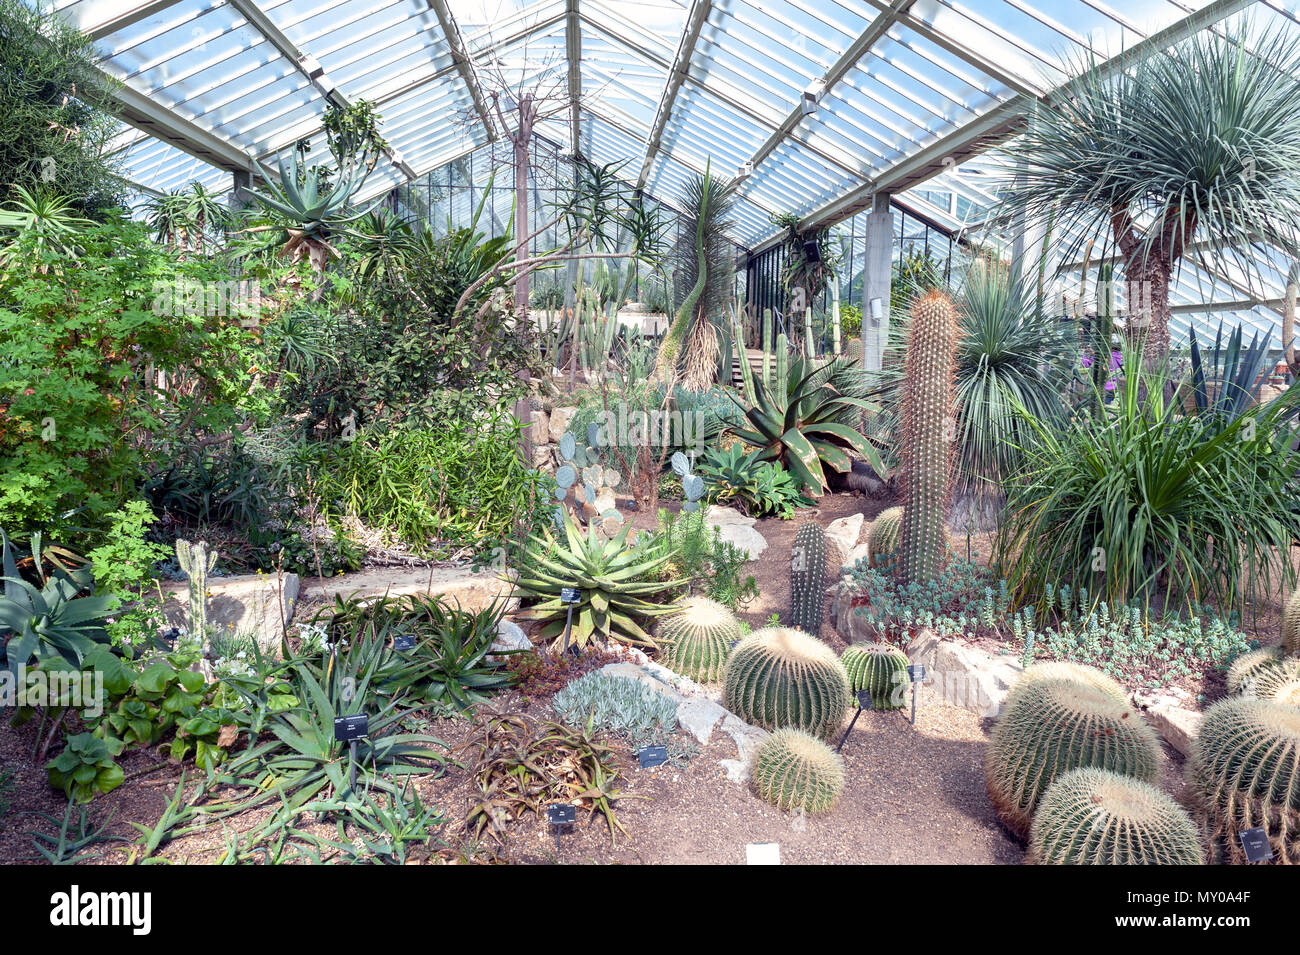 London, UK - April 2018: Cacti and plants from ten different climate zones being exhibited at Princess of Wales Conservatory, Kew Garden Stock Photo